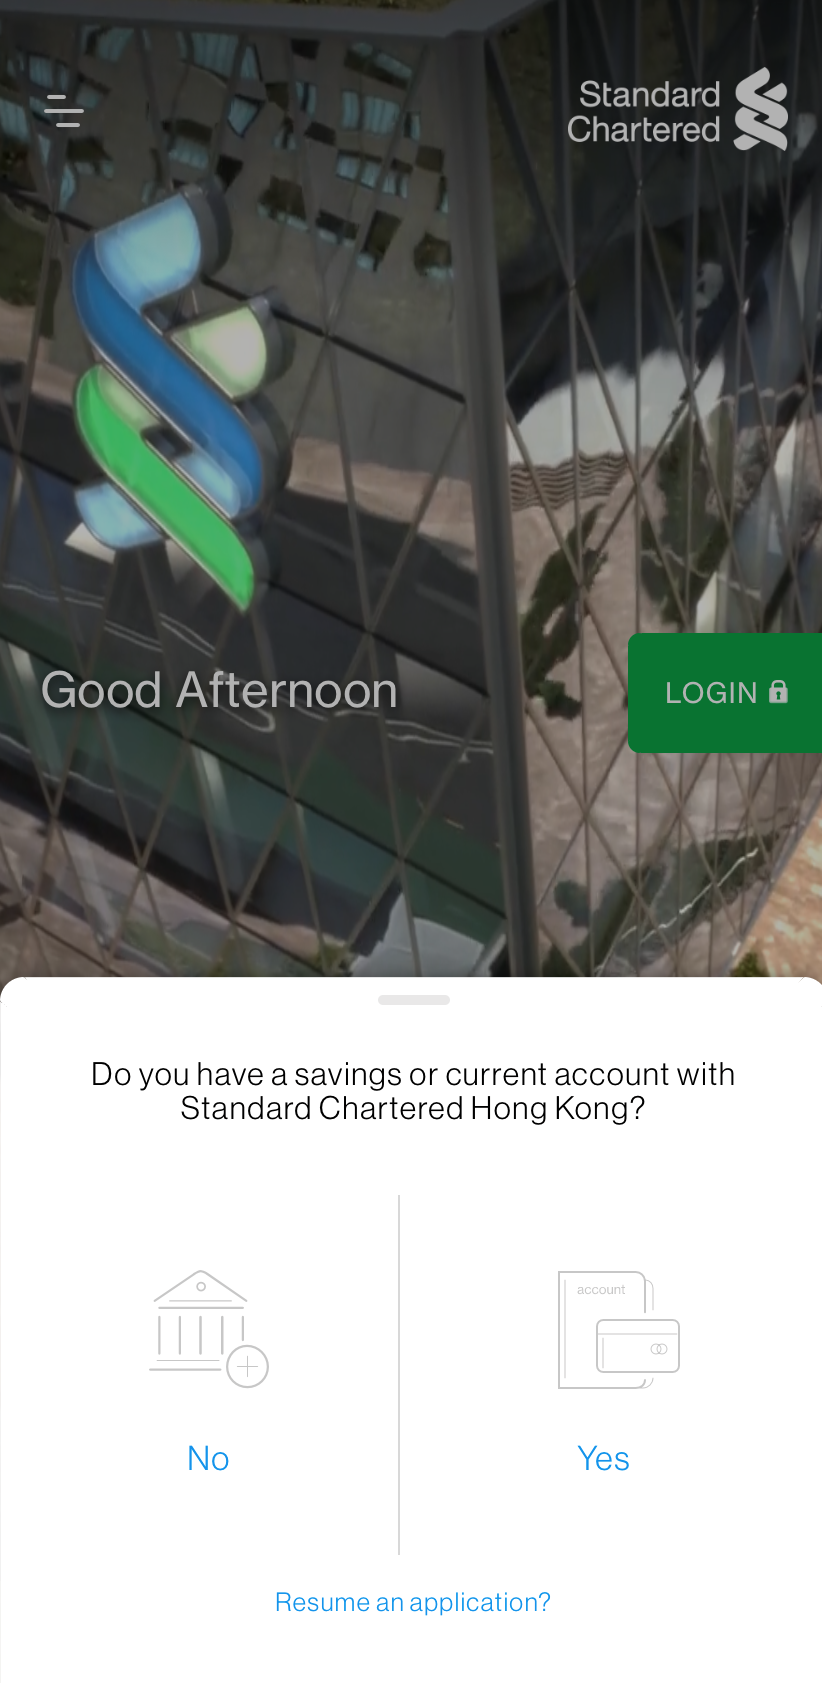 Confirm you are not holding any Deposits Account with SC now